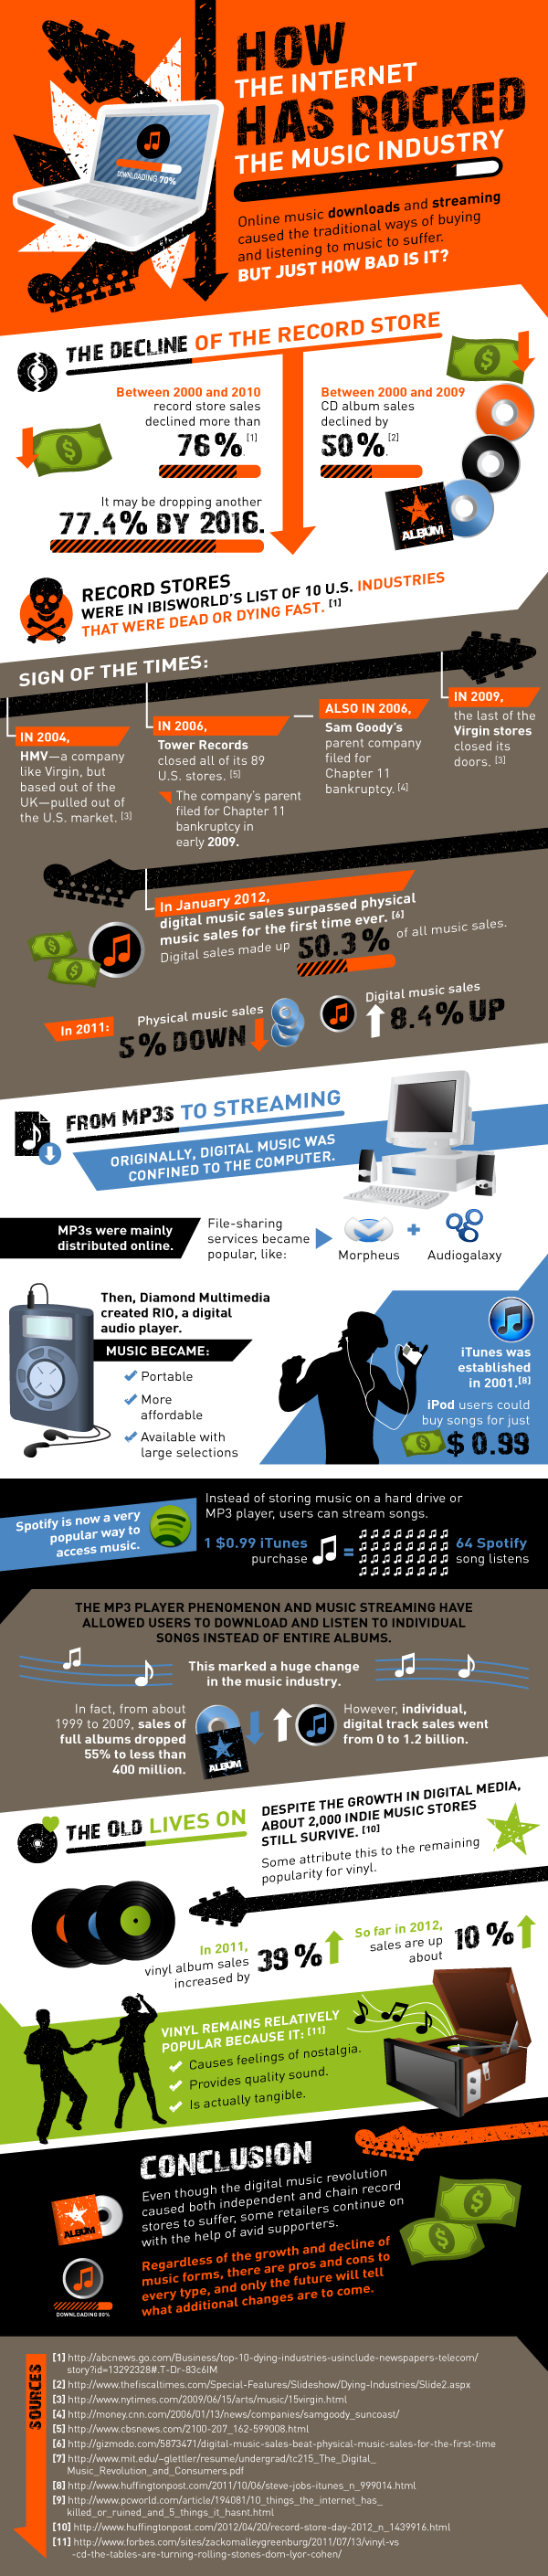 How the Internet has Rocked the Music Industry